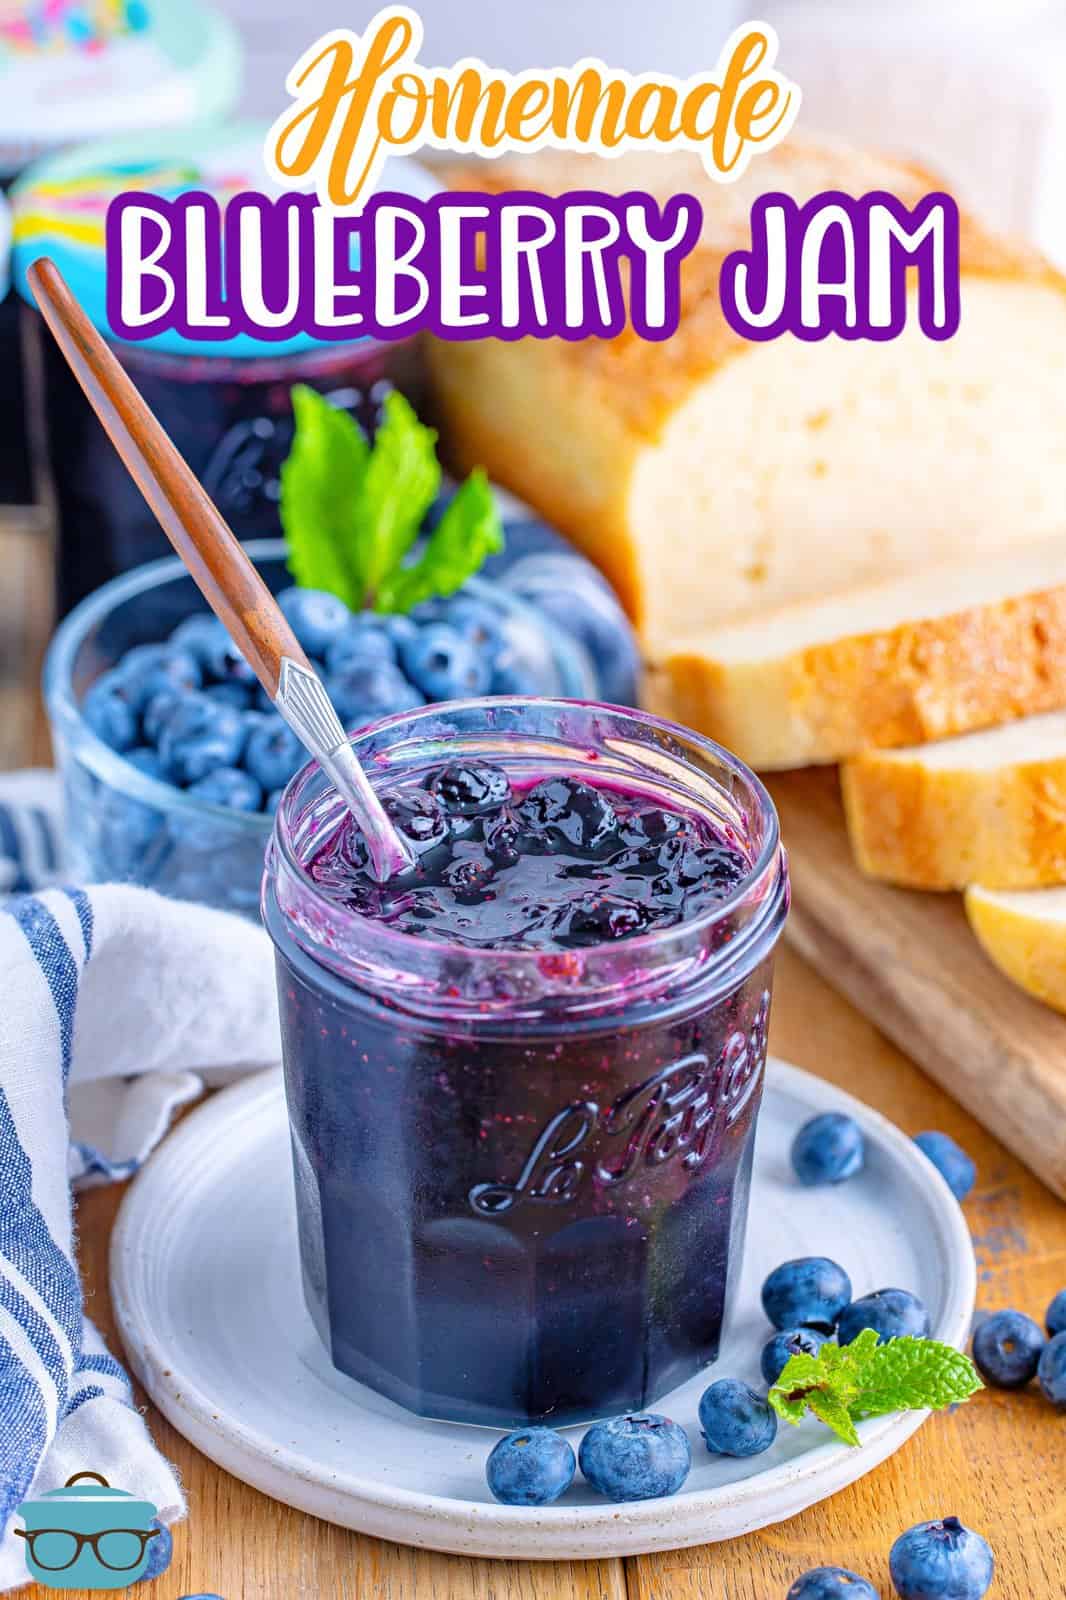 A jar of homemade blueberry jam with a spoon in it.